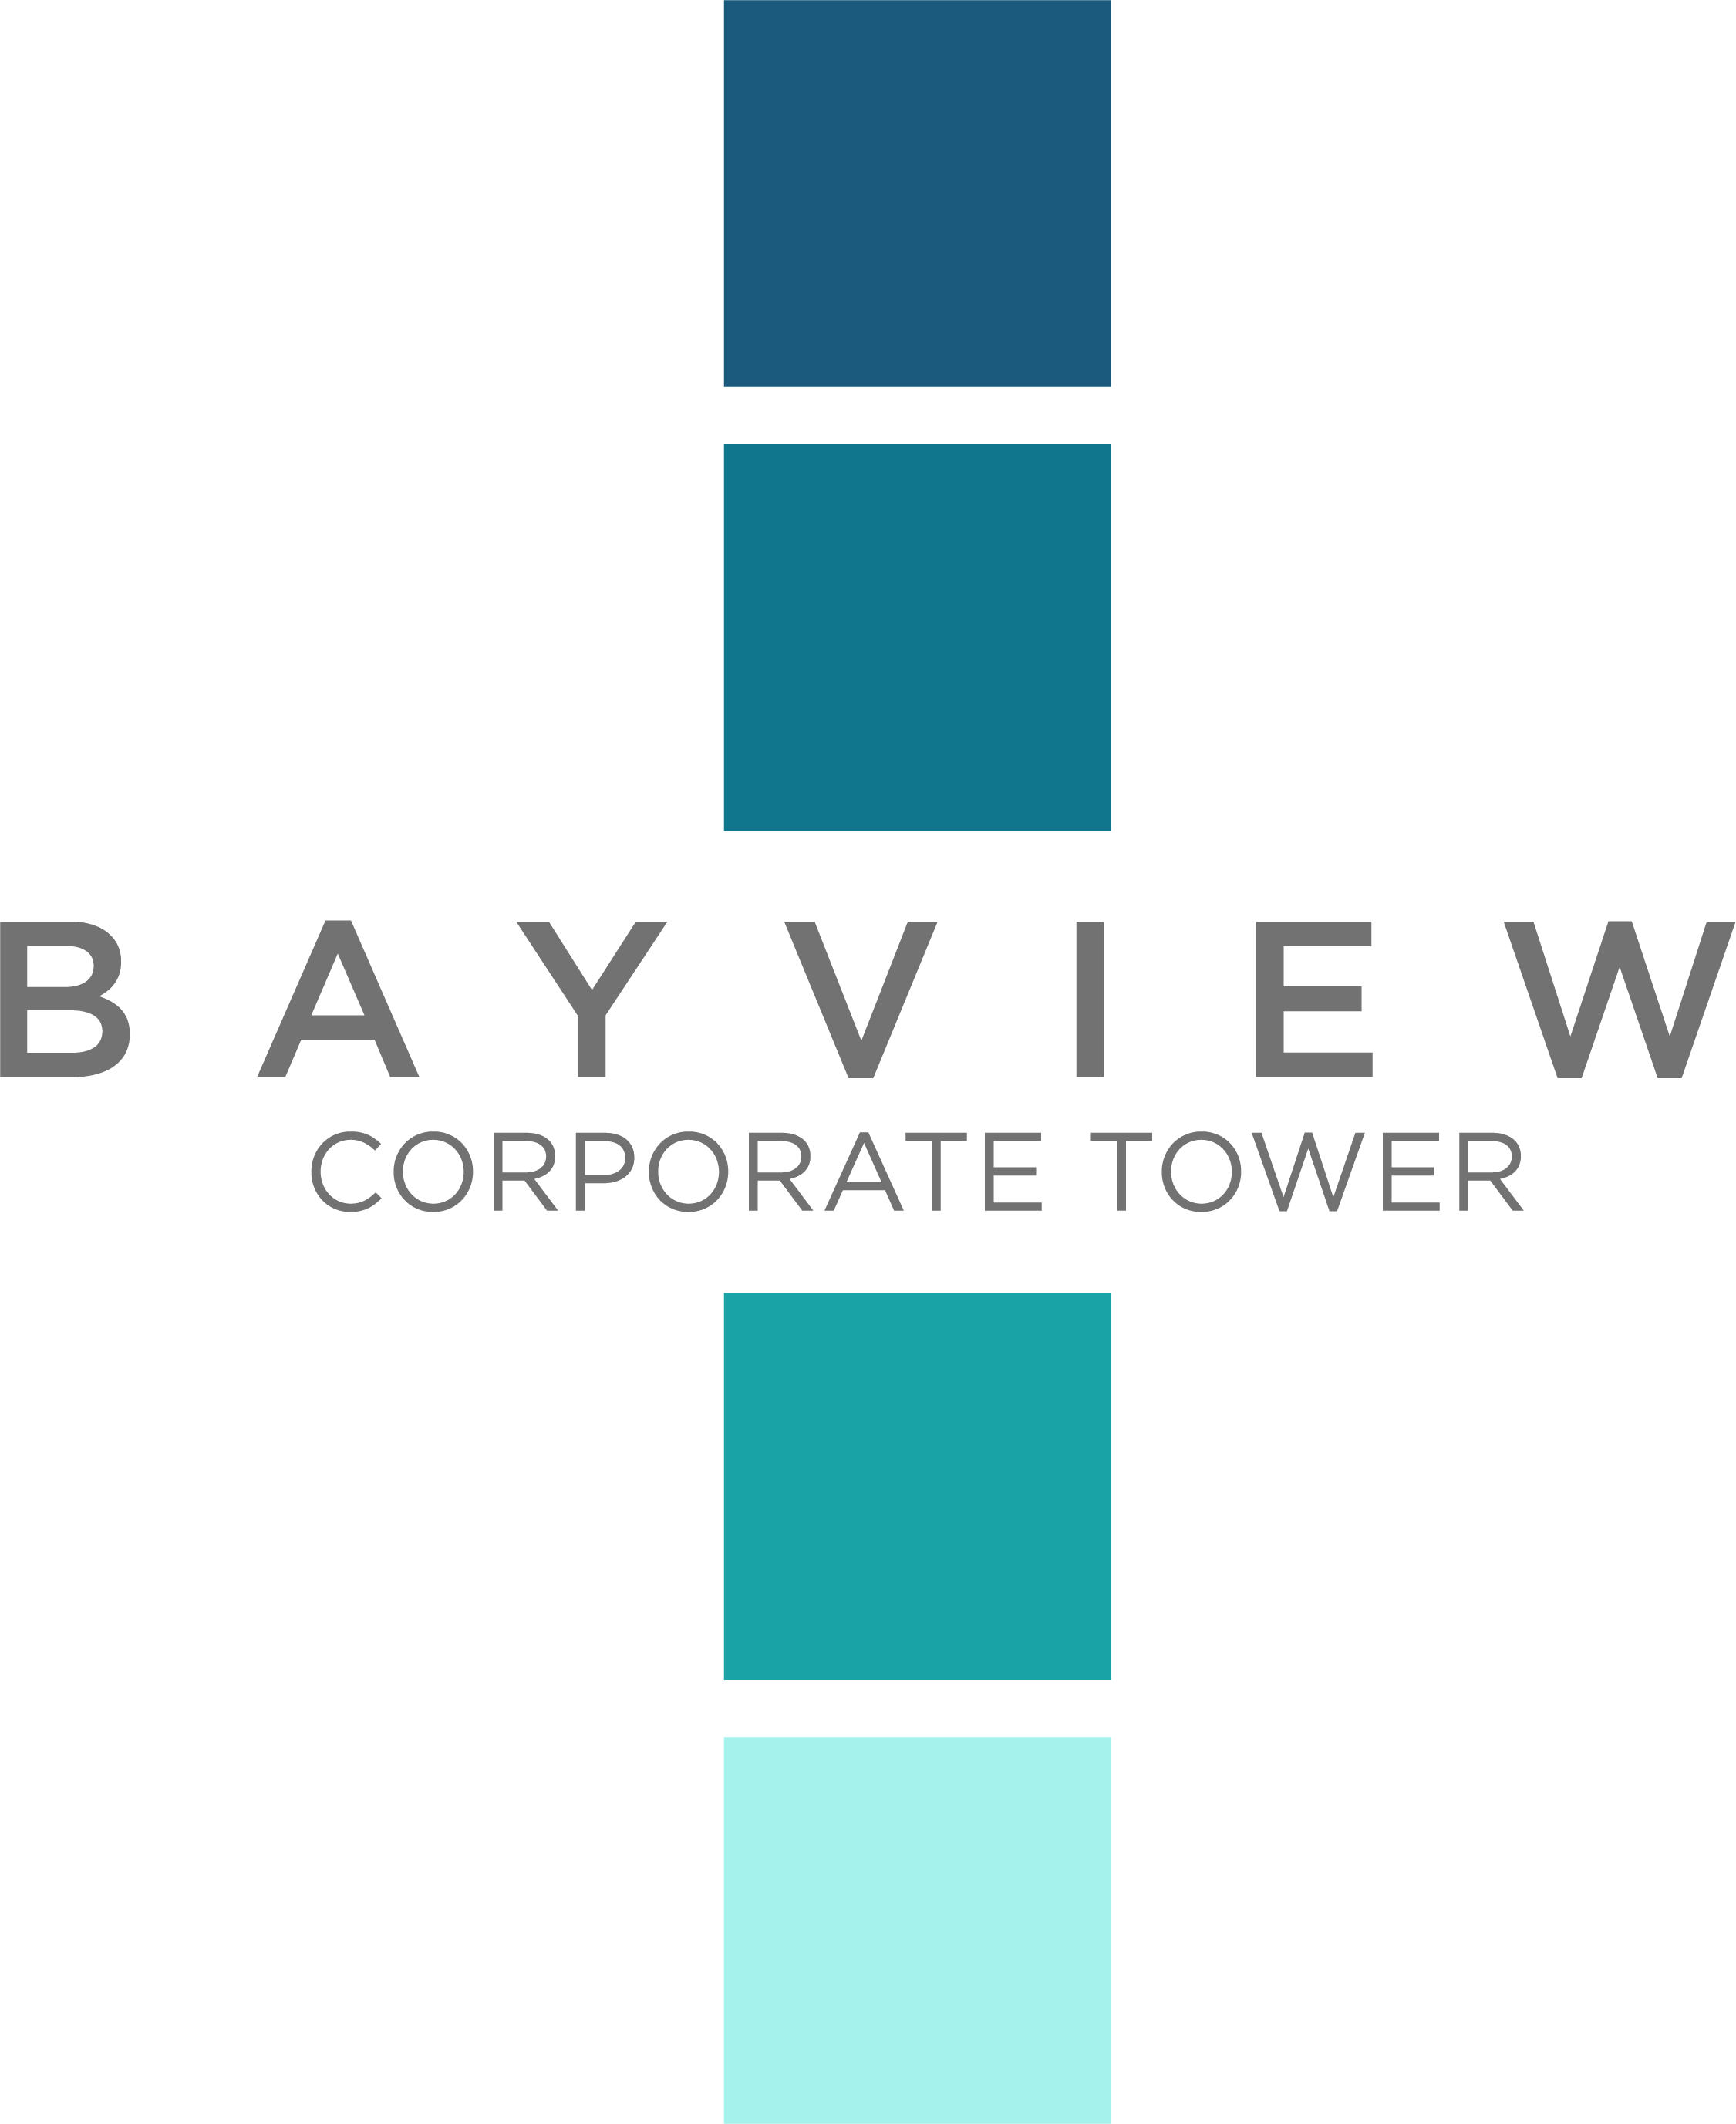 Bayview Corporate Tower